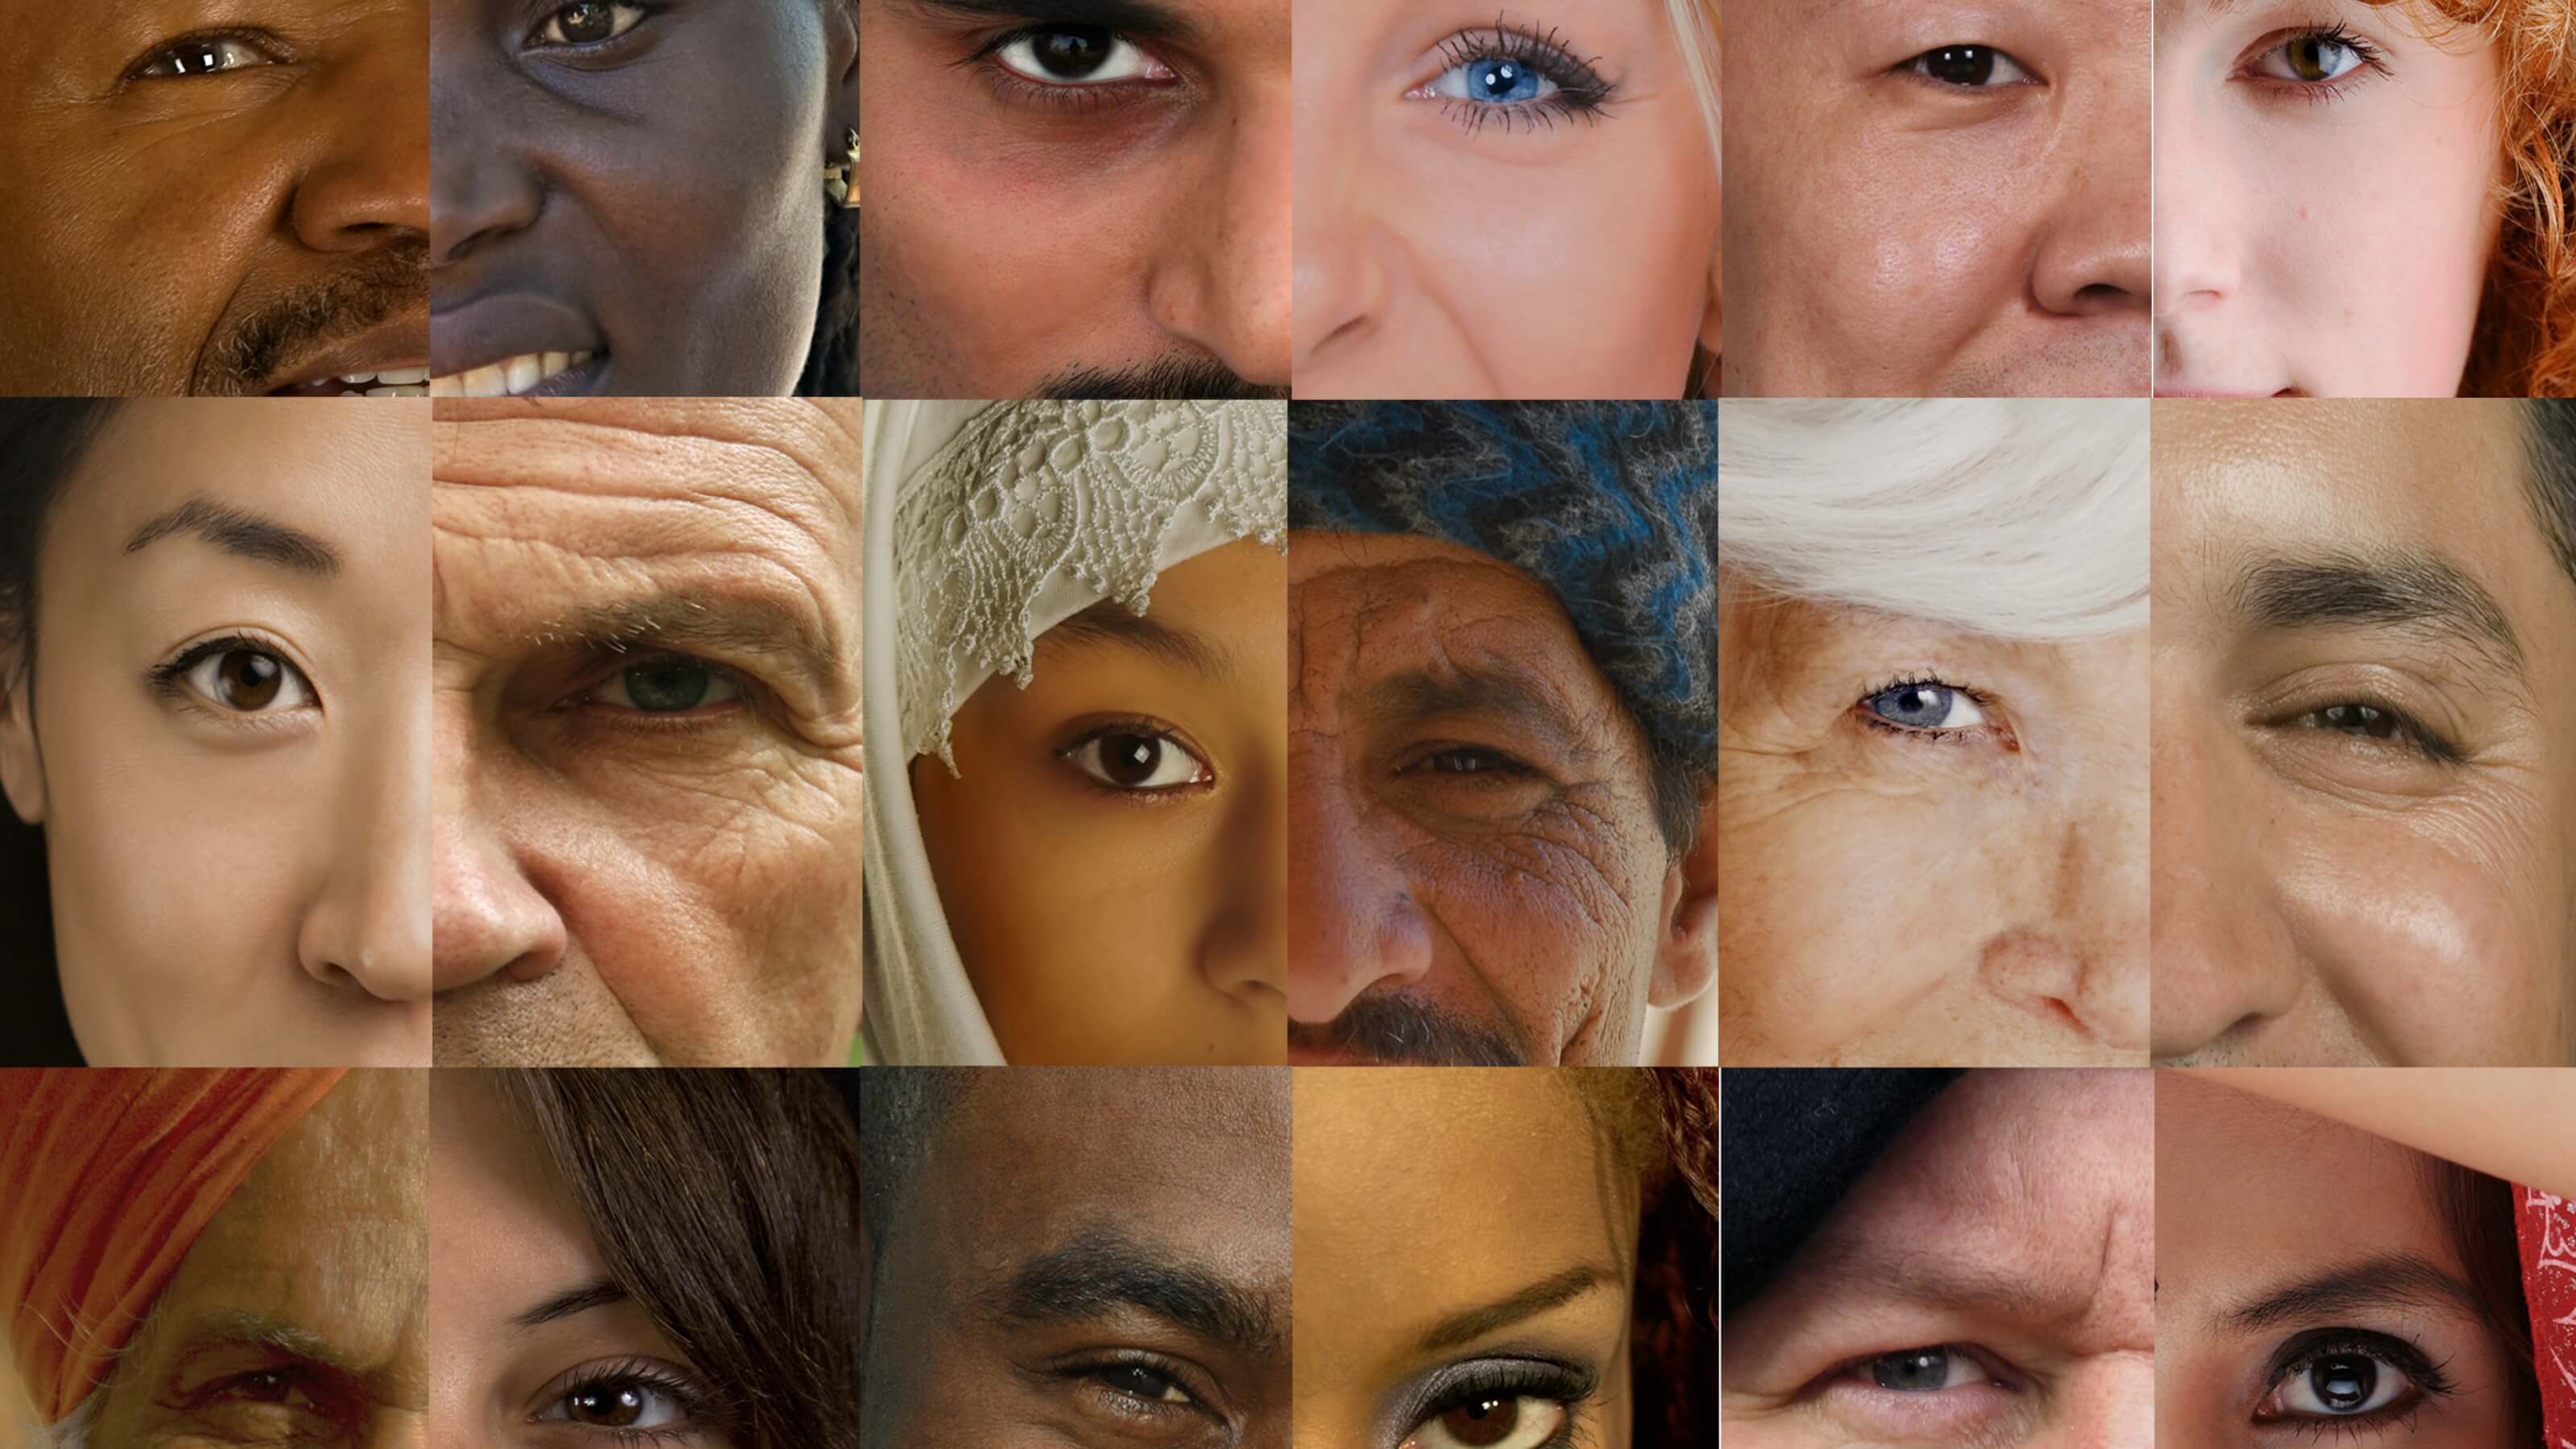 Many split faces put together to represent the multi-cultural face of New Zealand.